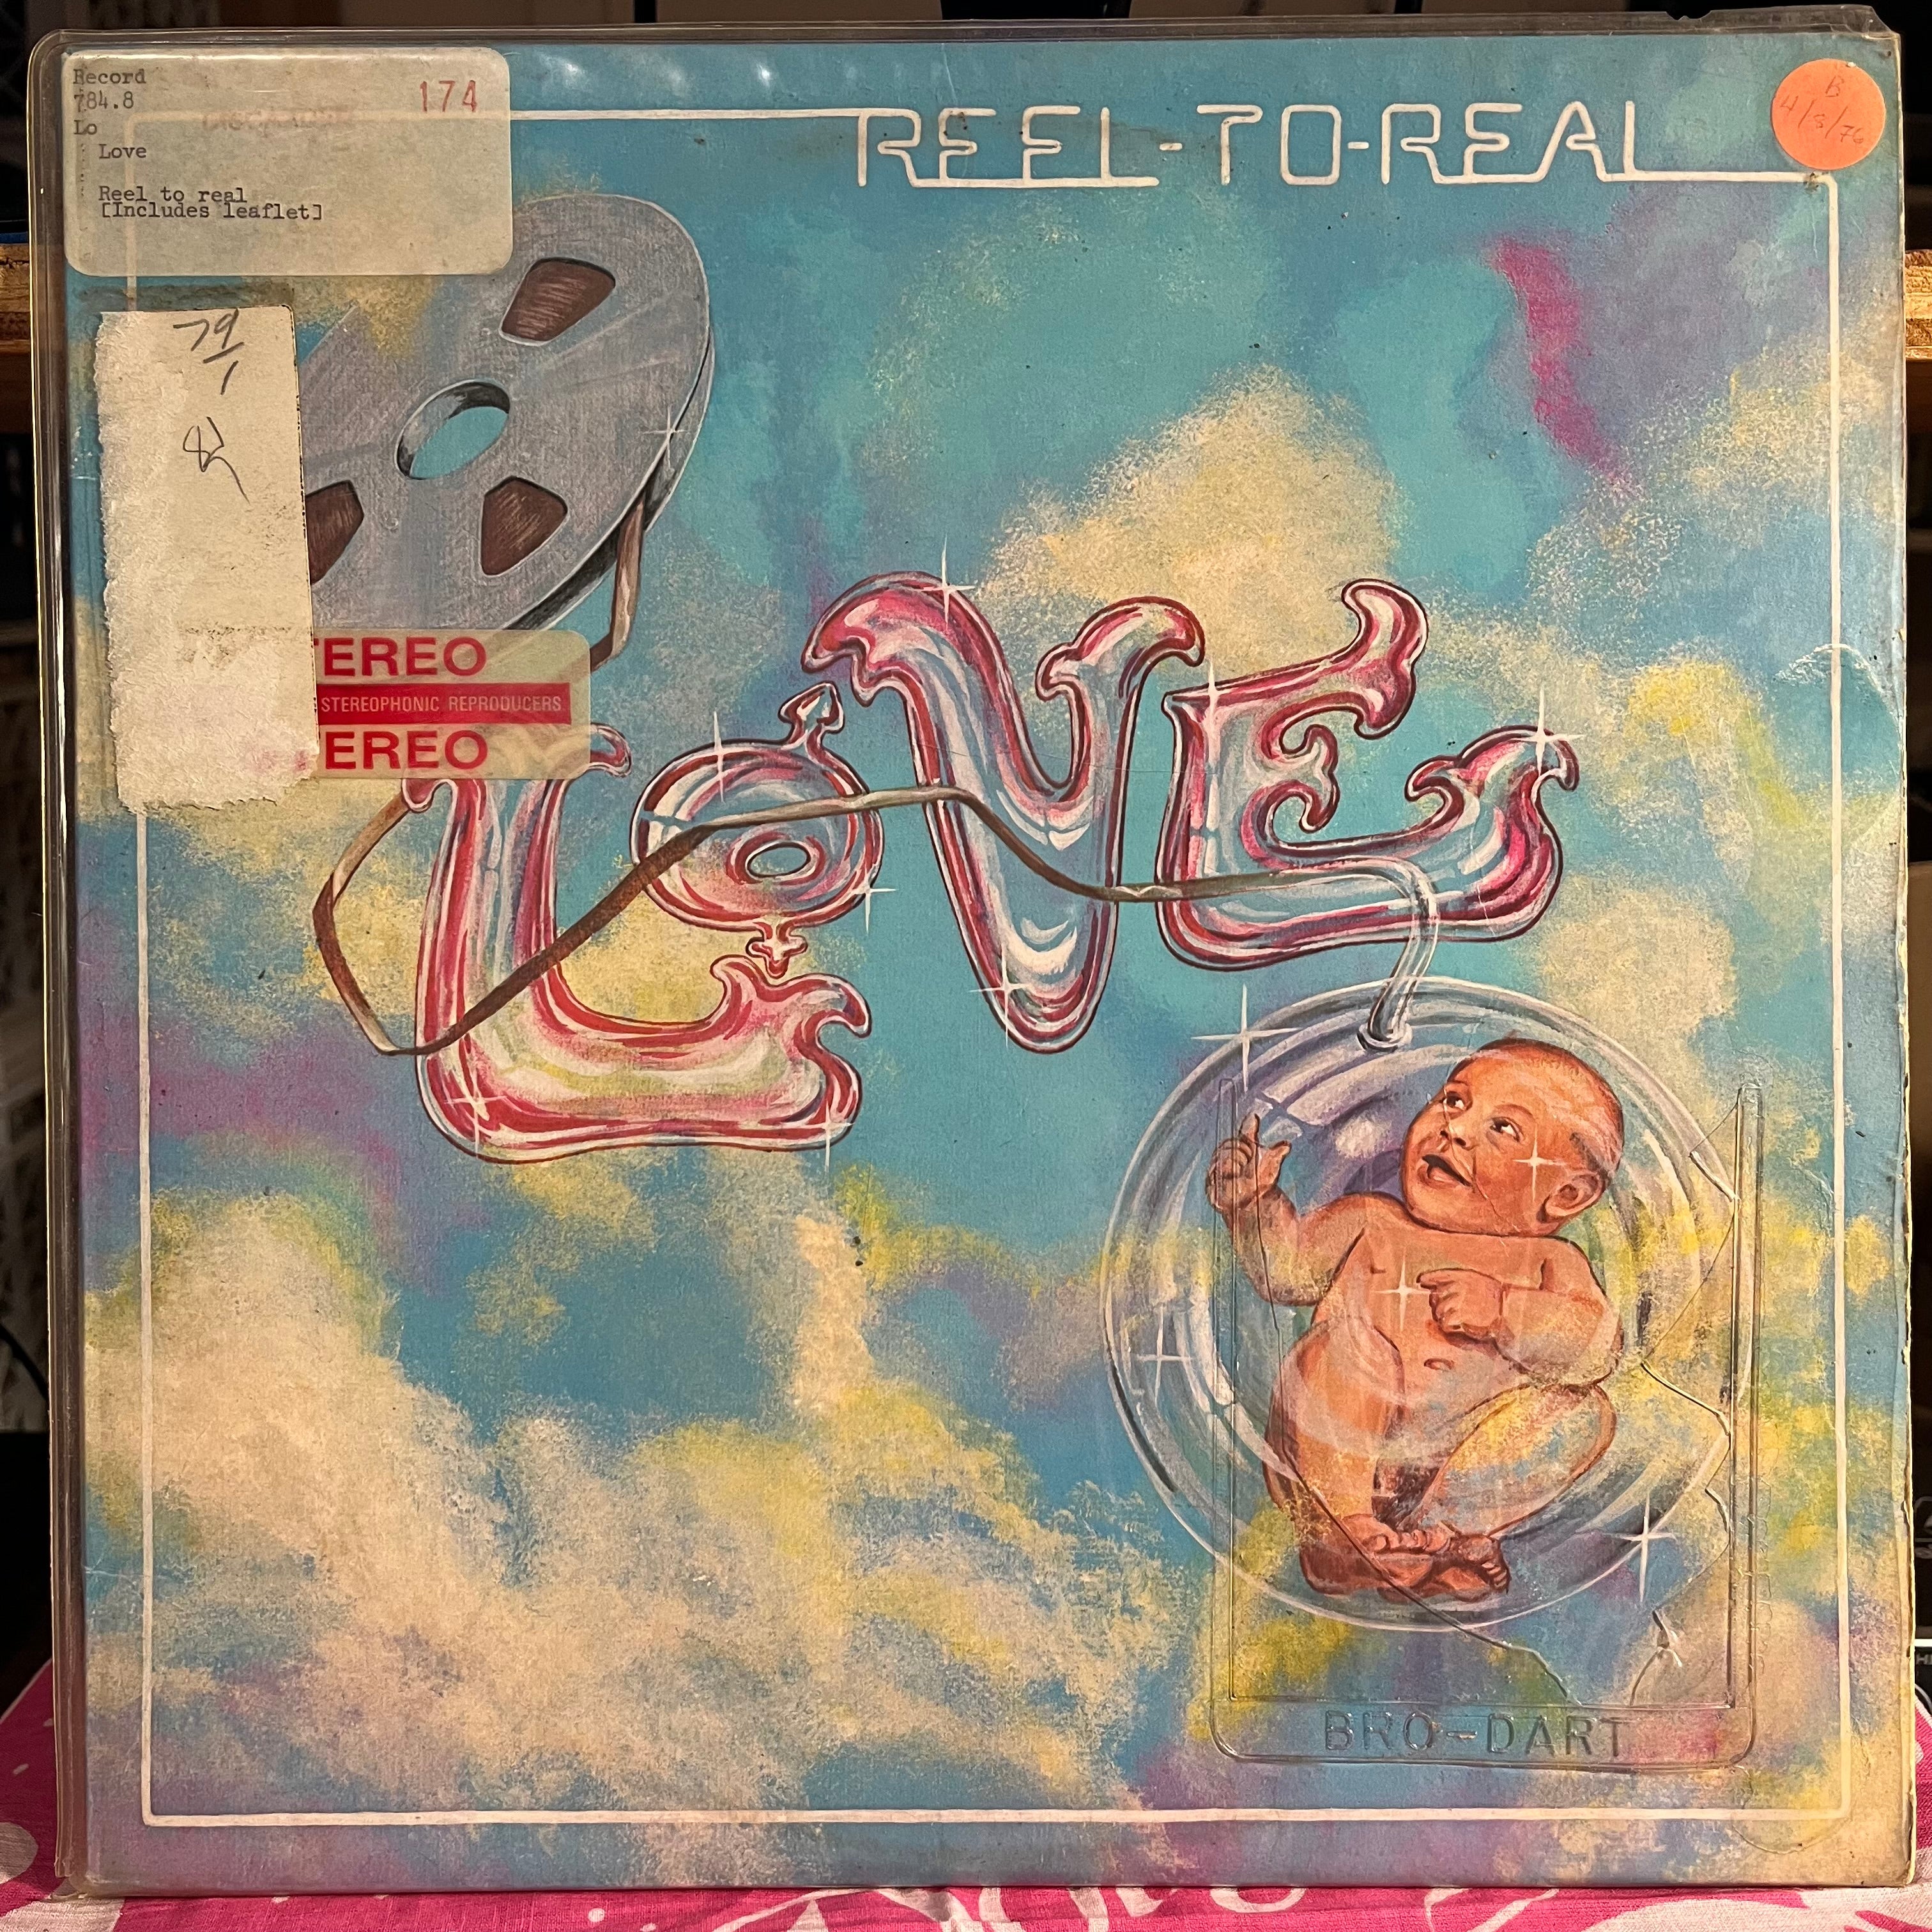 Love Reel-To-Real *SPECIALTY* LP Very Good (VG) Very Good (VG)